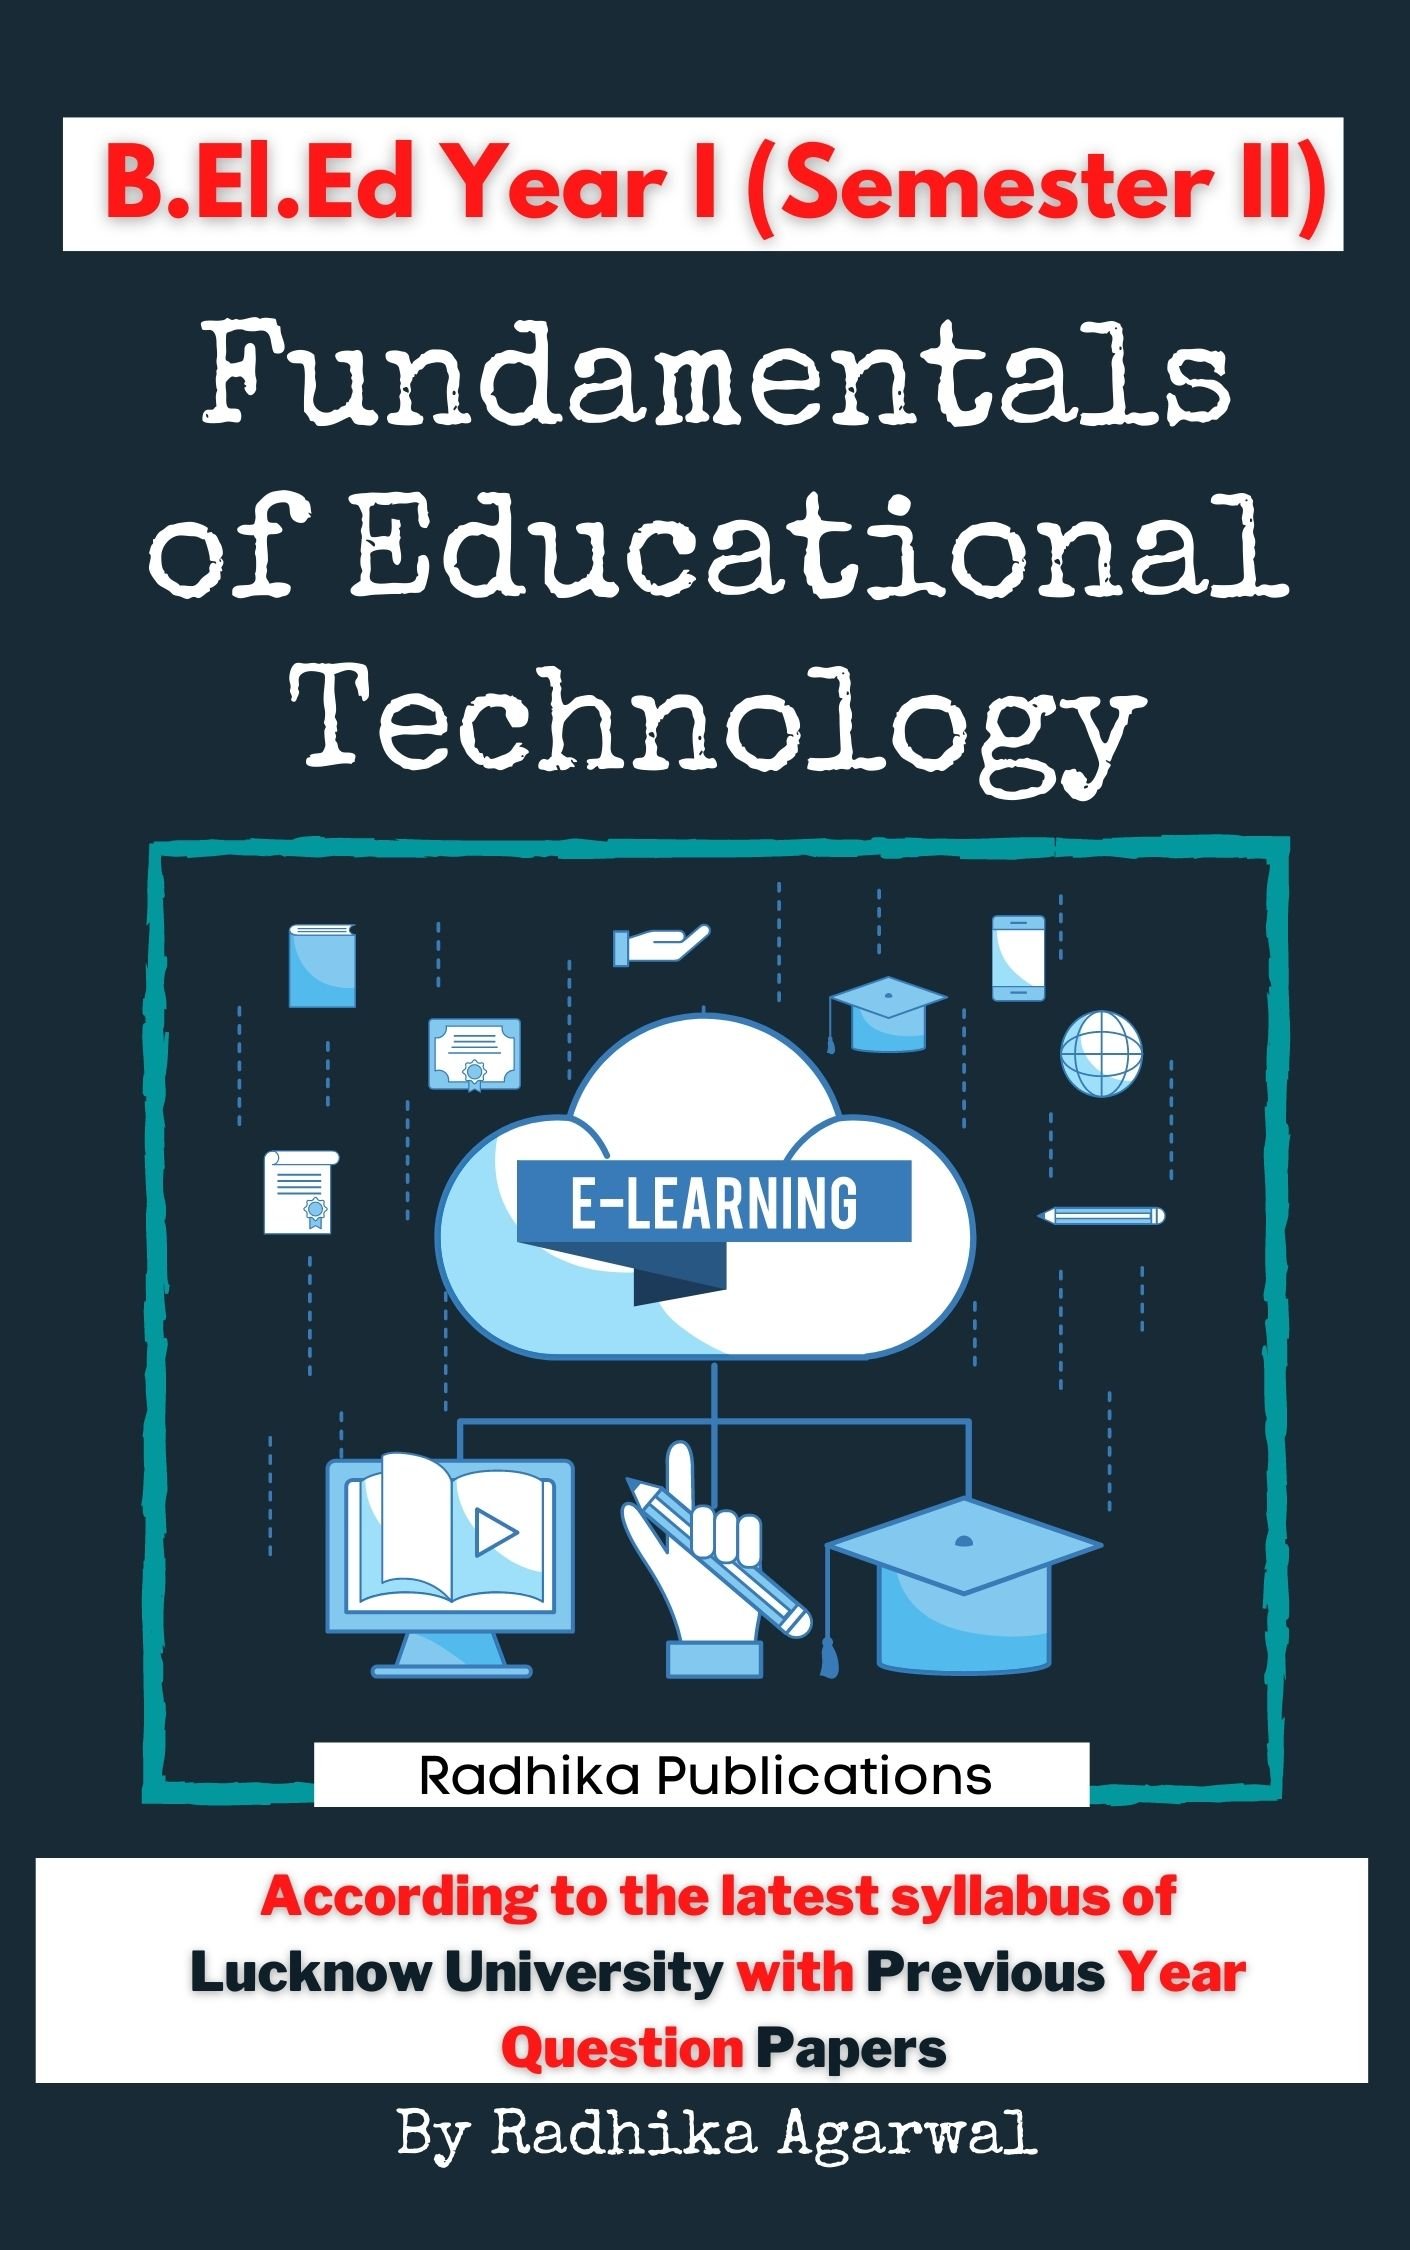 EDUCATIONAL TECHNOLOGY LU FRONT COVER